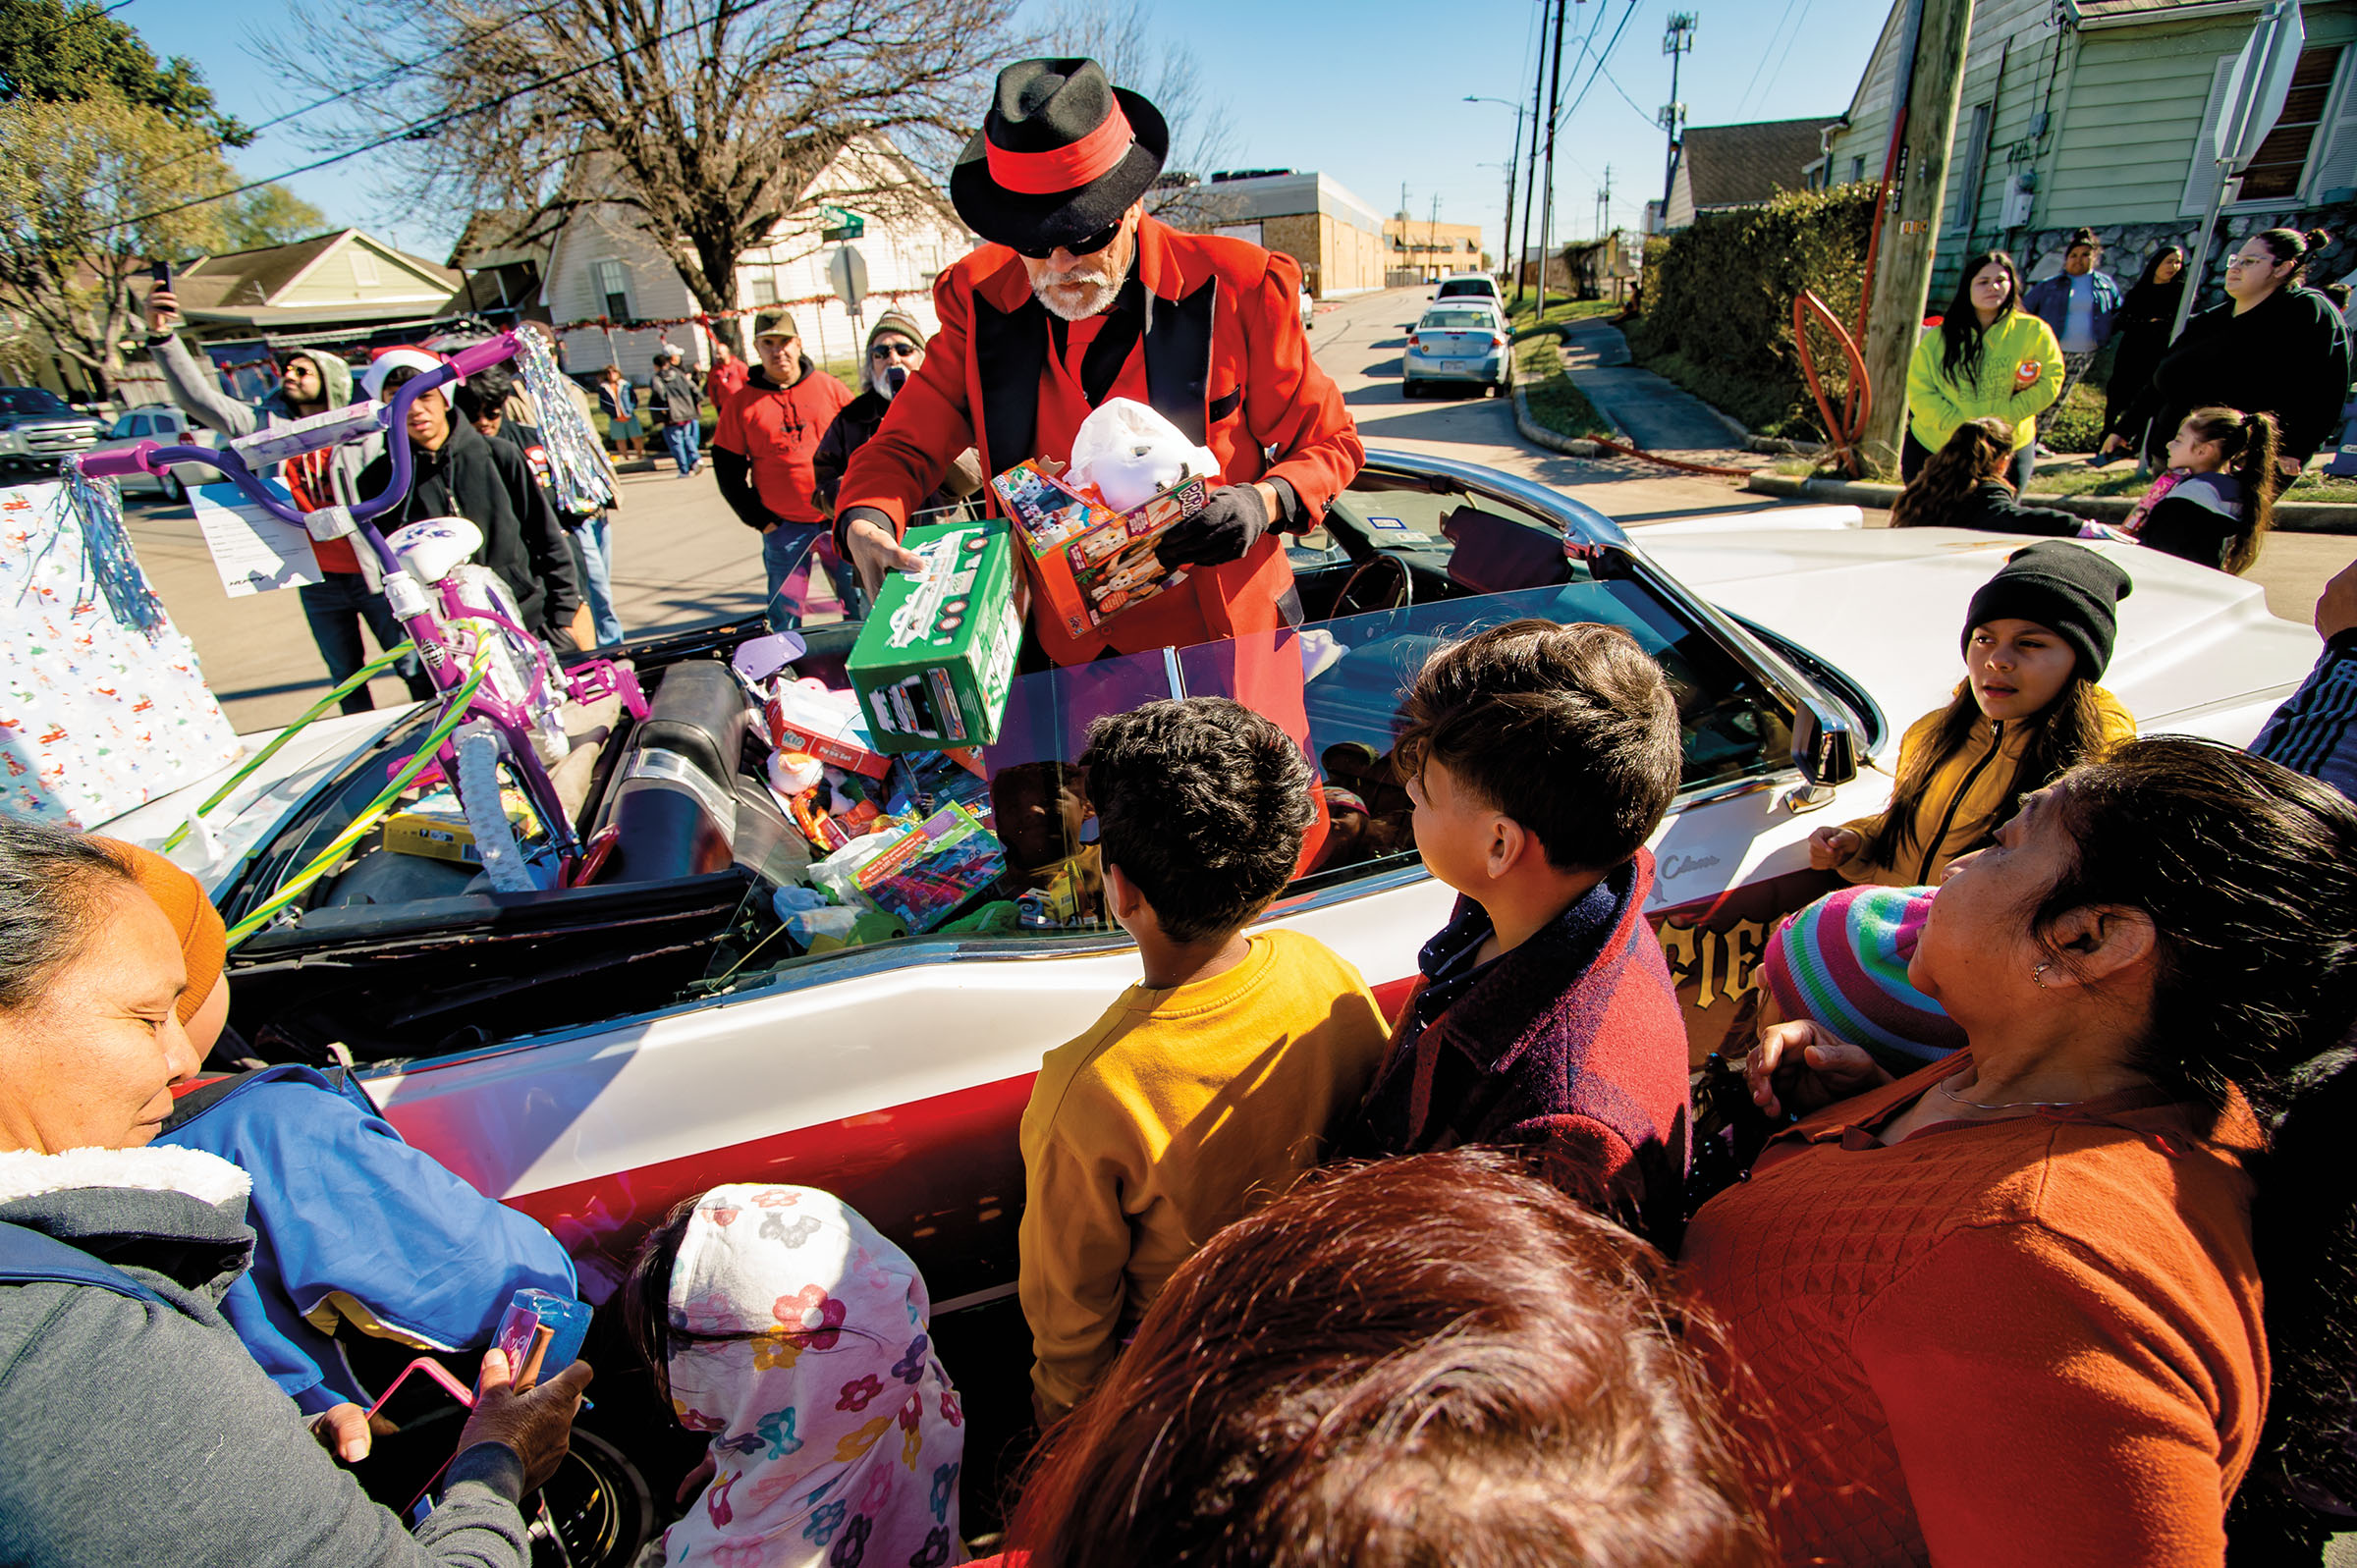 A man in a bright red zoot suit and black hat hands out presents to children from the back of a red convertable car